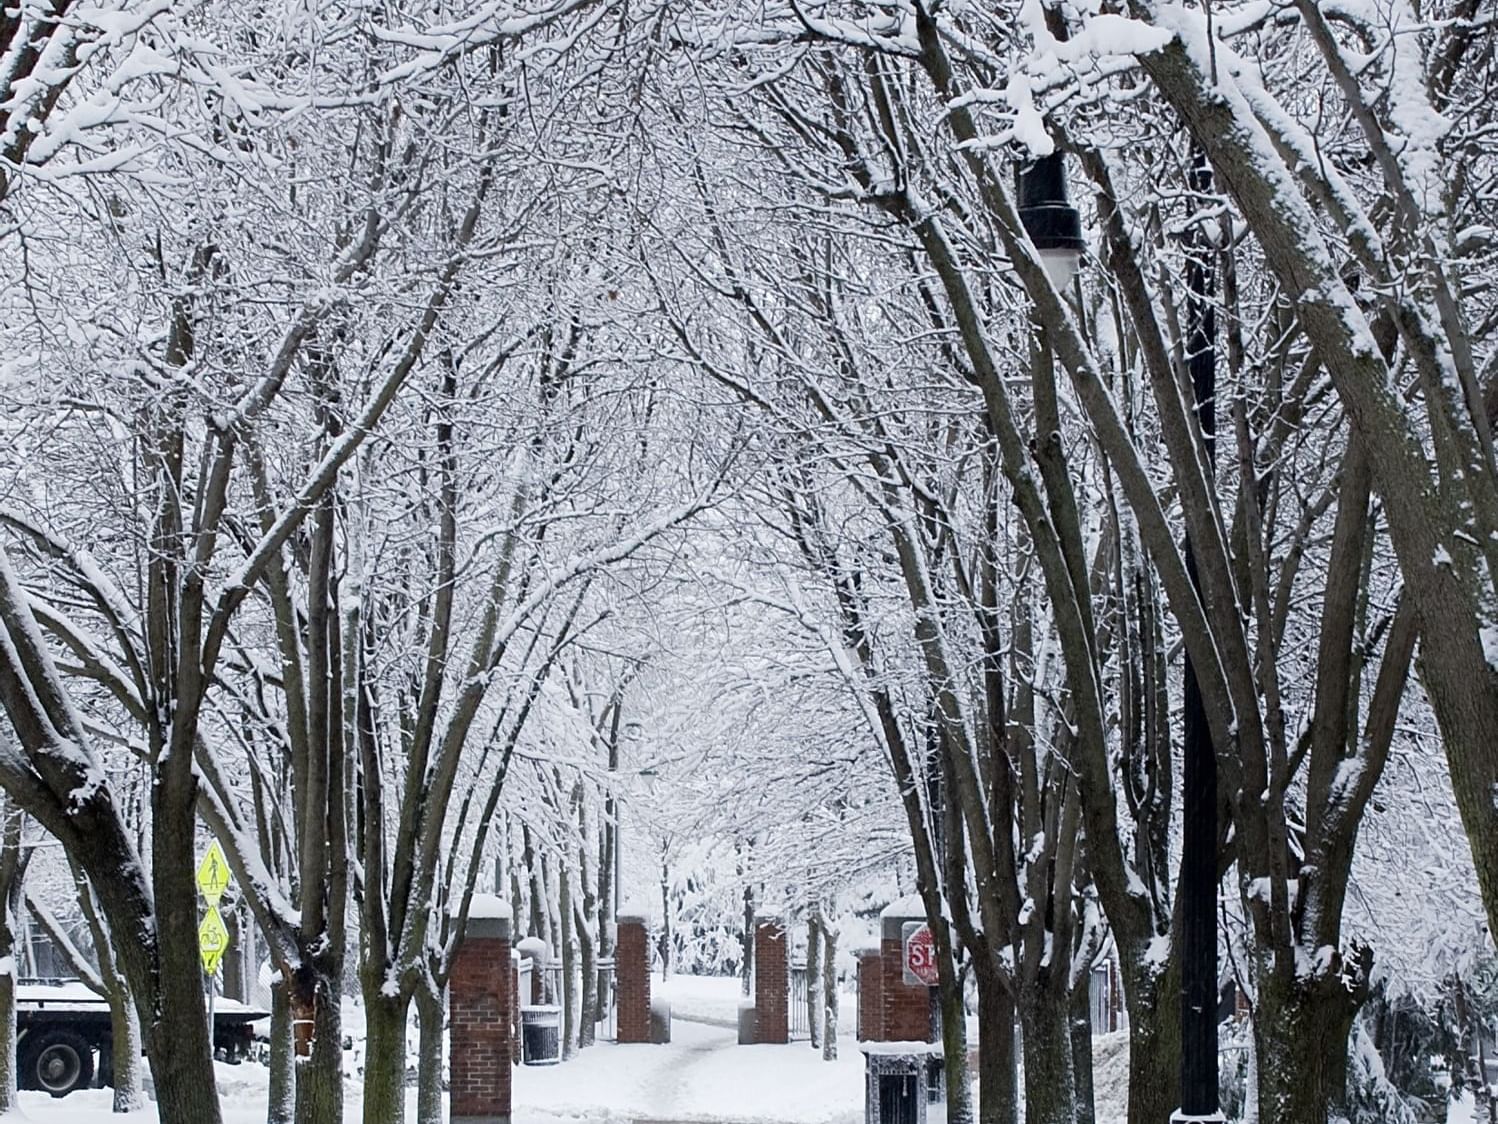 Snow-covered trees near The Eliot Hotel, Boston top attractions, captured during winter